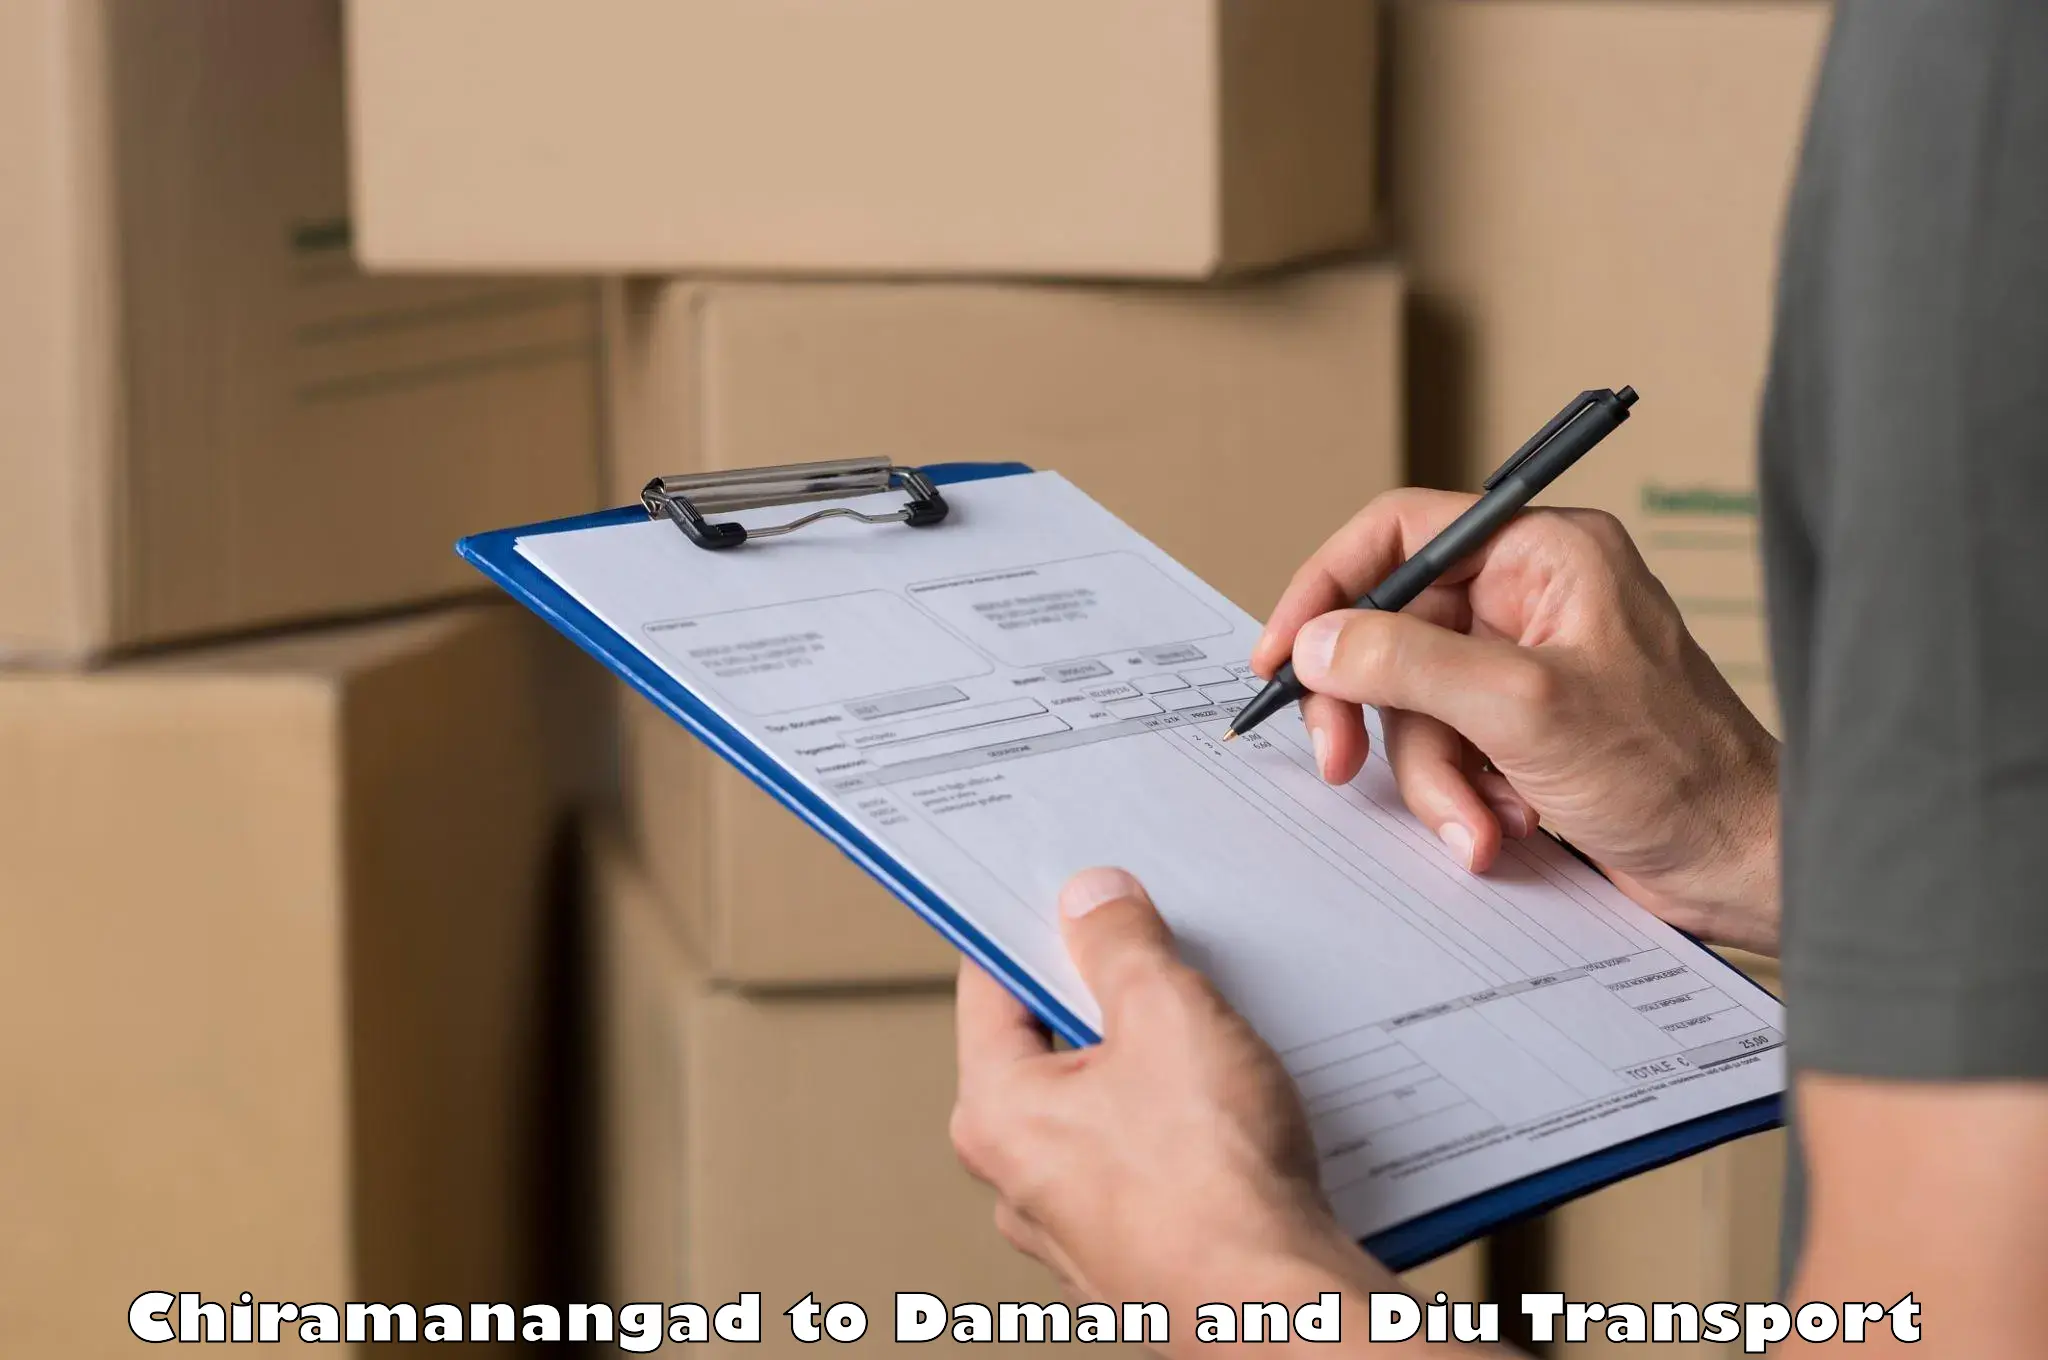 Delivery service Chiramanangad to Diu